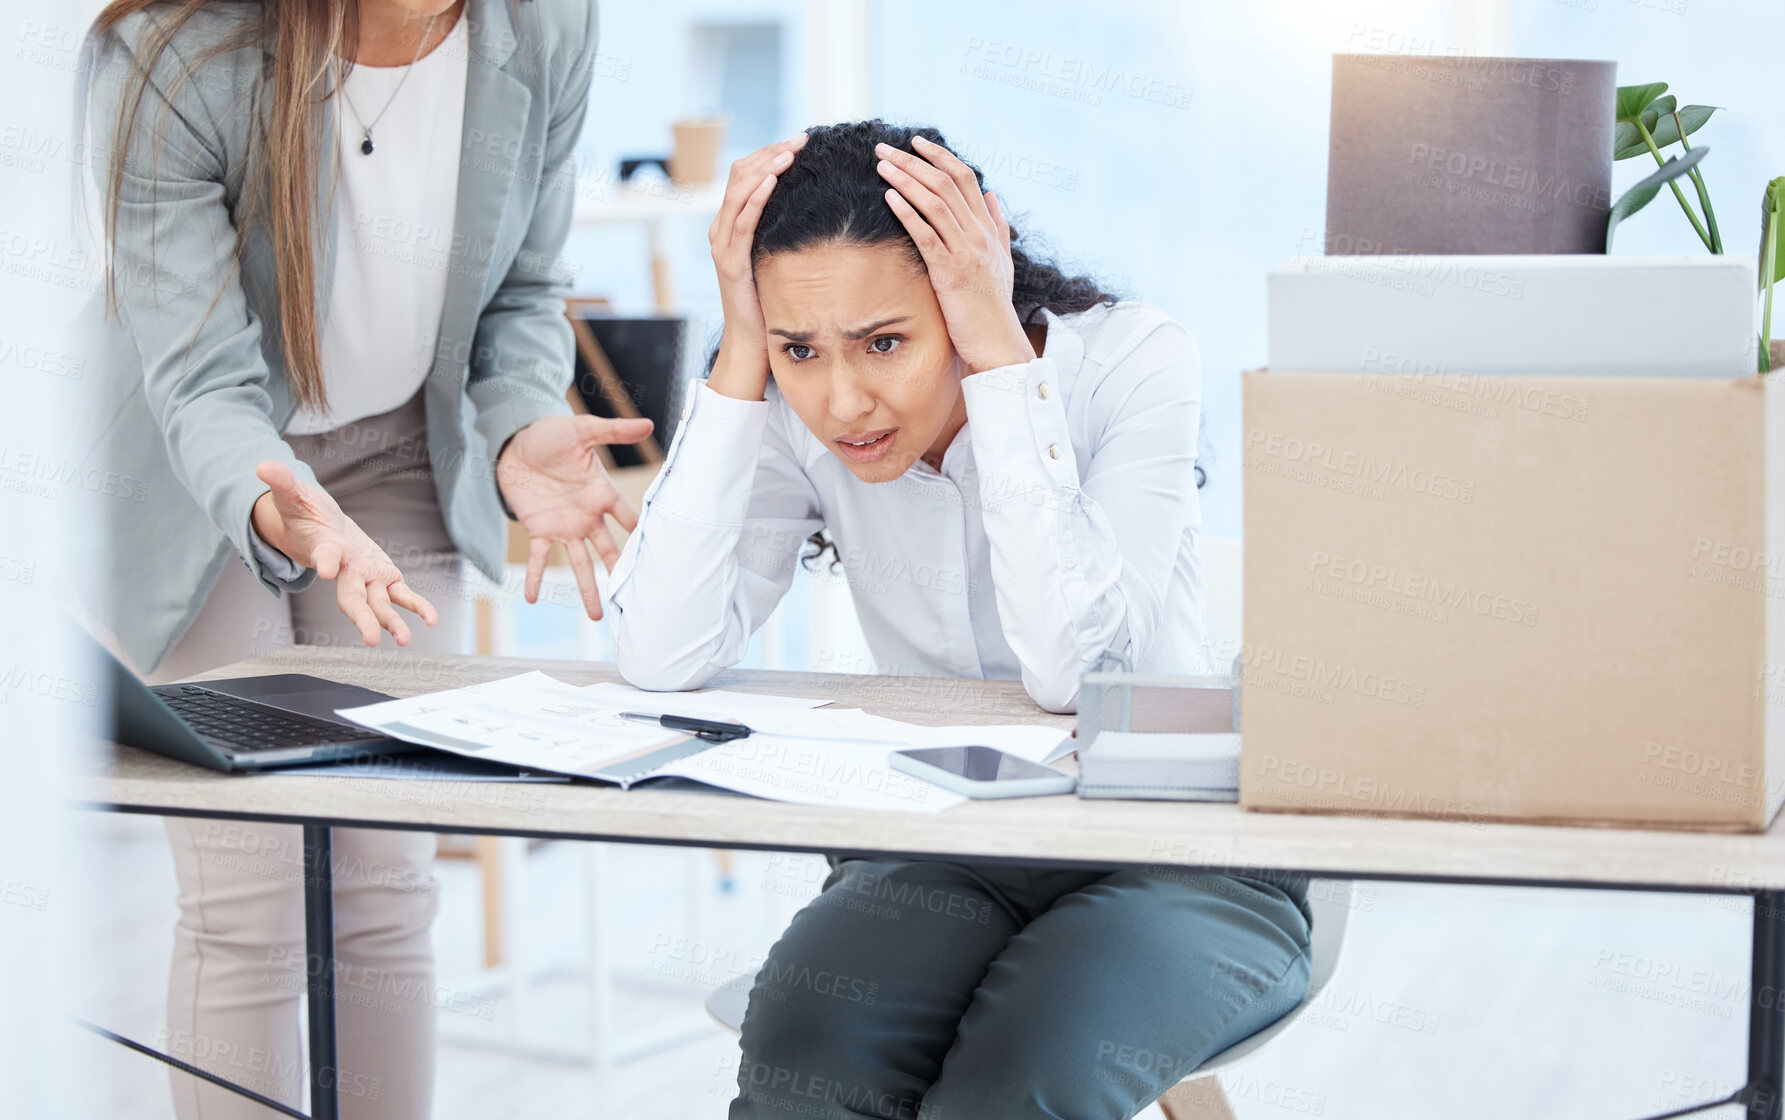 Buy stock photo Shot of a young businesswoman looking overwhelmed in an office at work